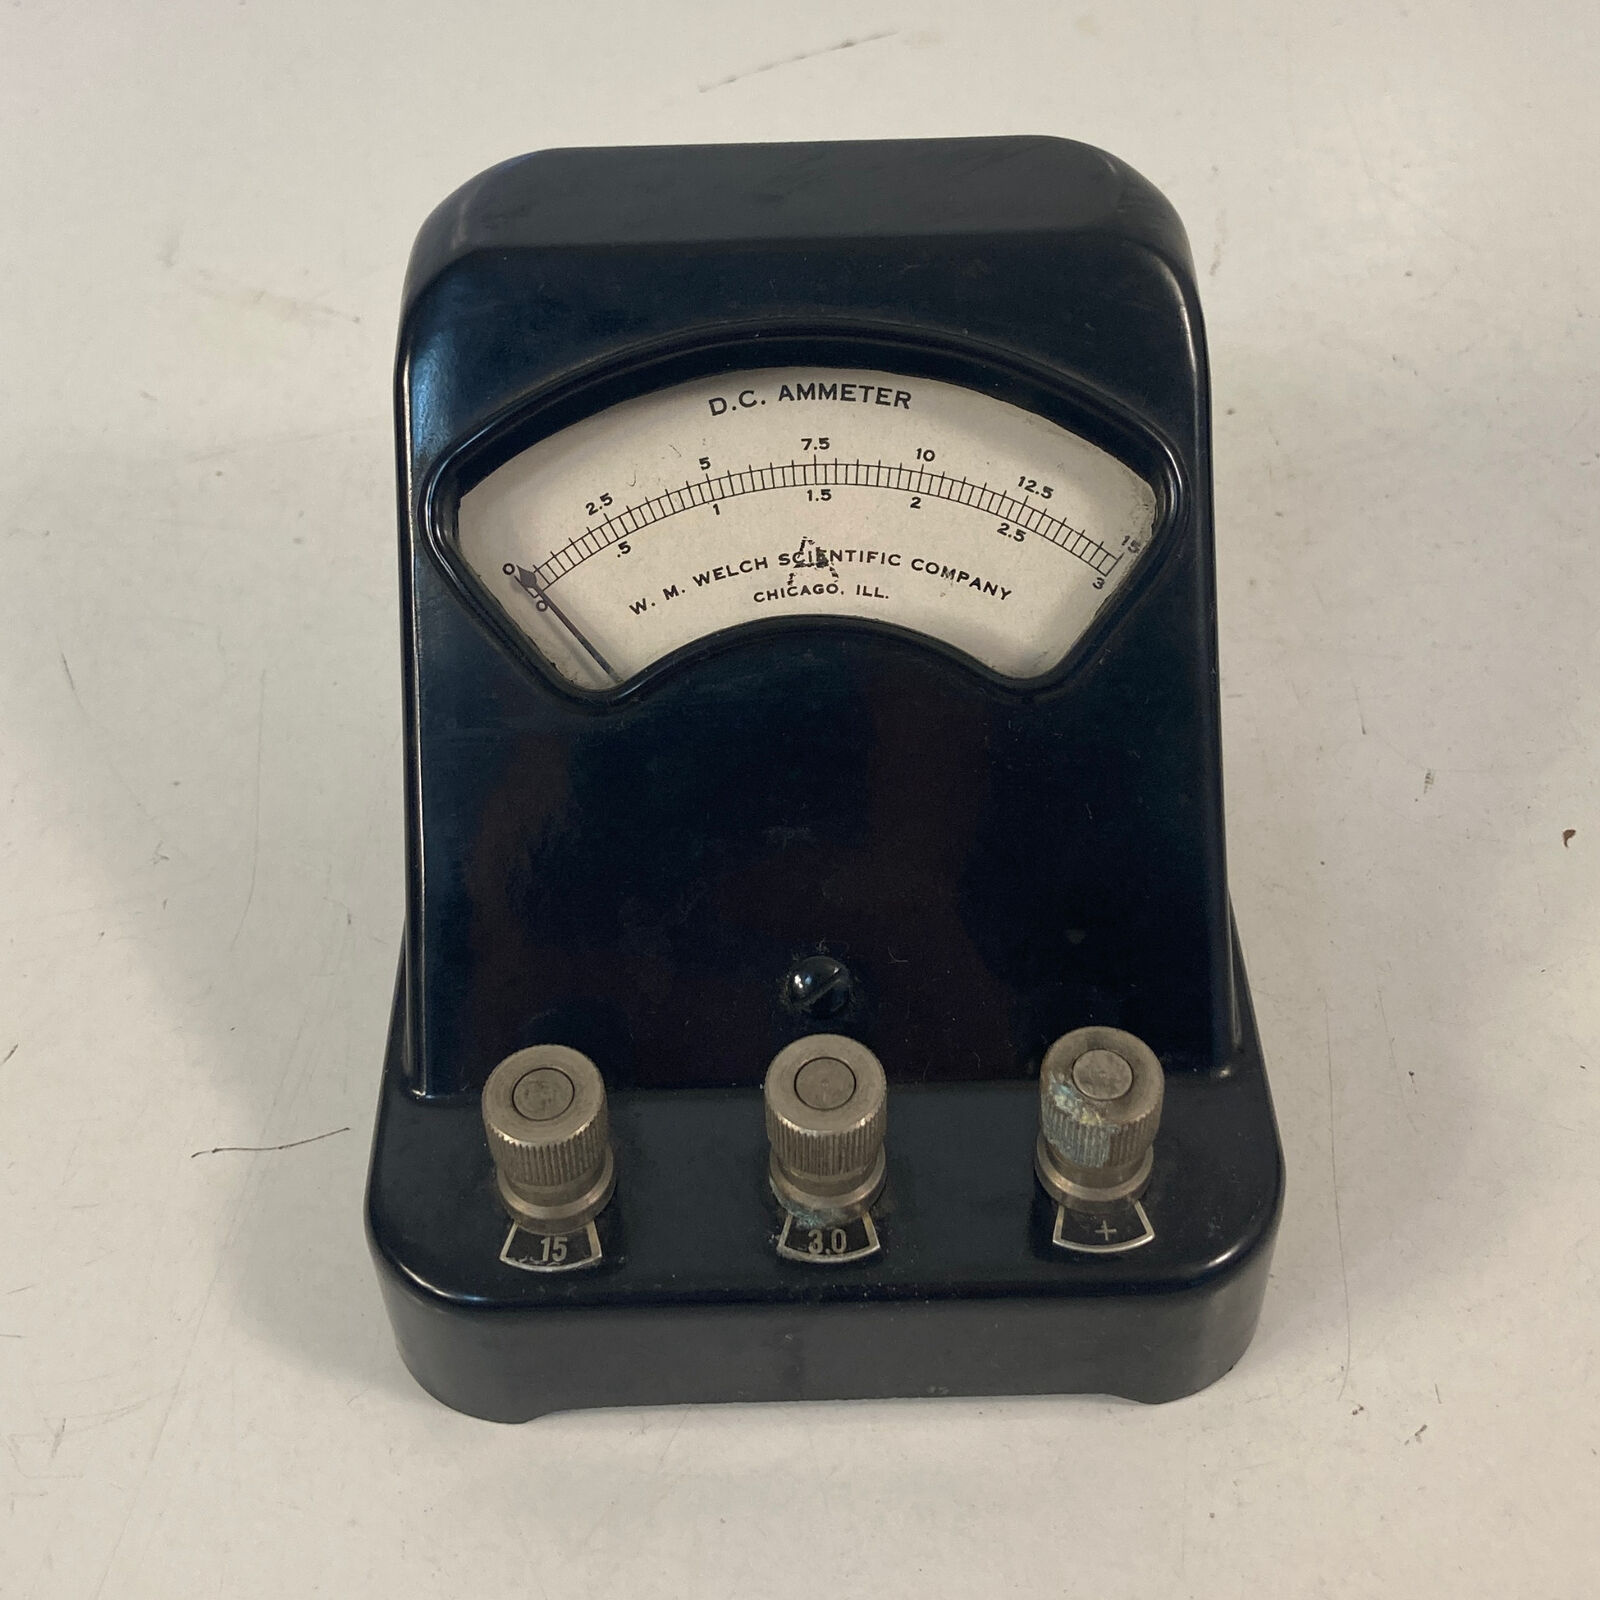 W.M. Welch Scientific Company D.C. Ammeter CAT. NO. 3031N Untested Prop Chicago